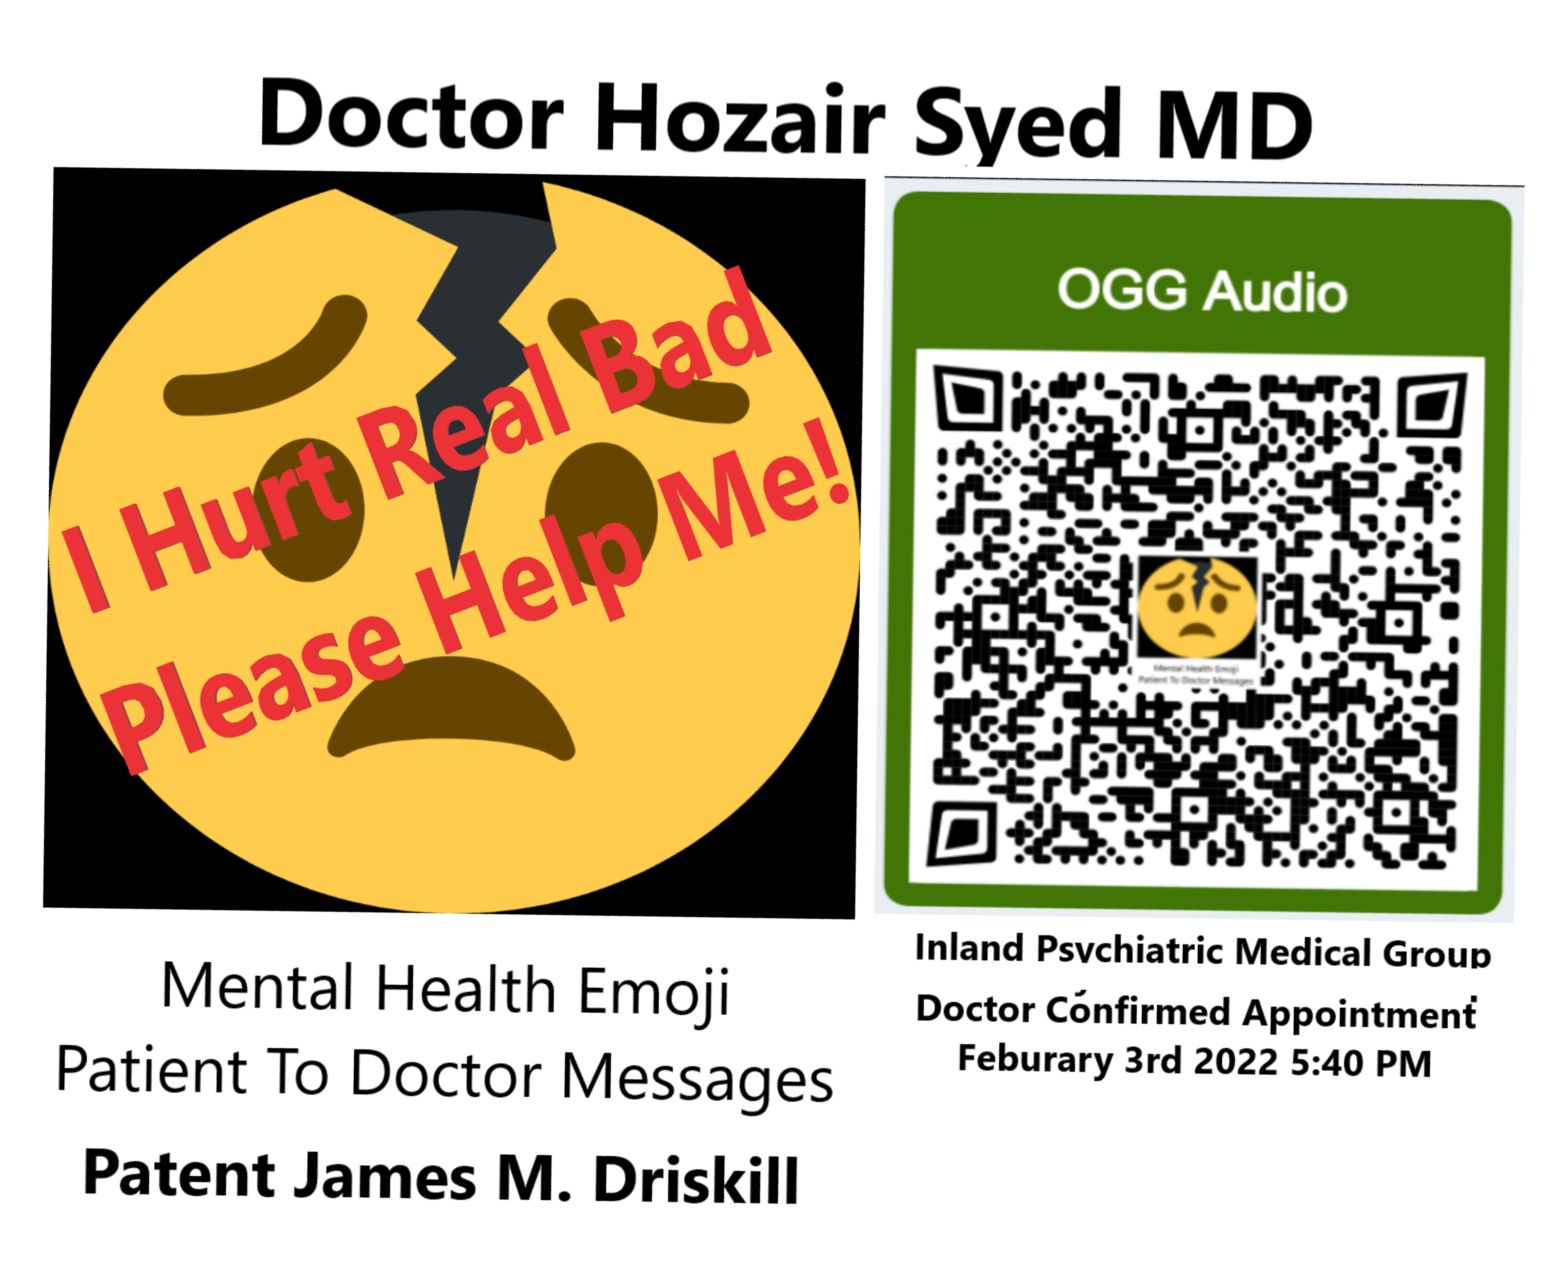 Kareo-ConfirmedDoctorAppointment-Feb032022-540pm-Doctor-Hozair-Syed-Md.png